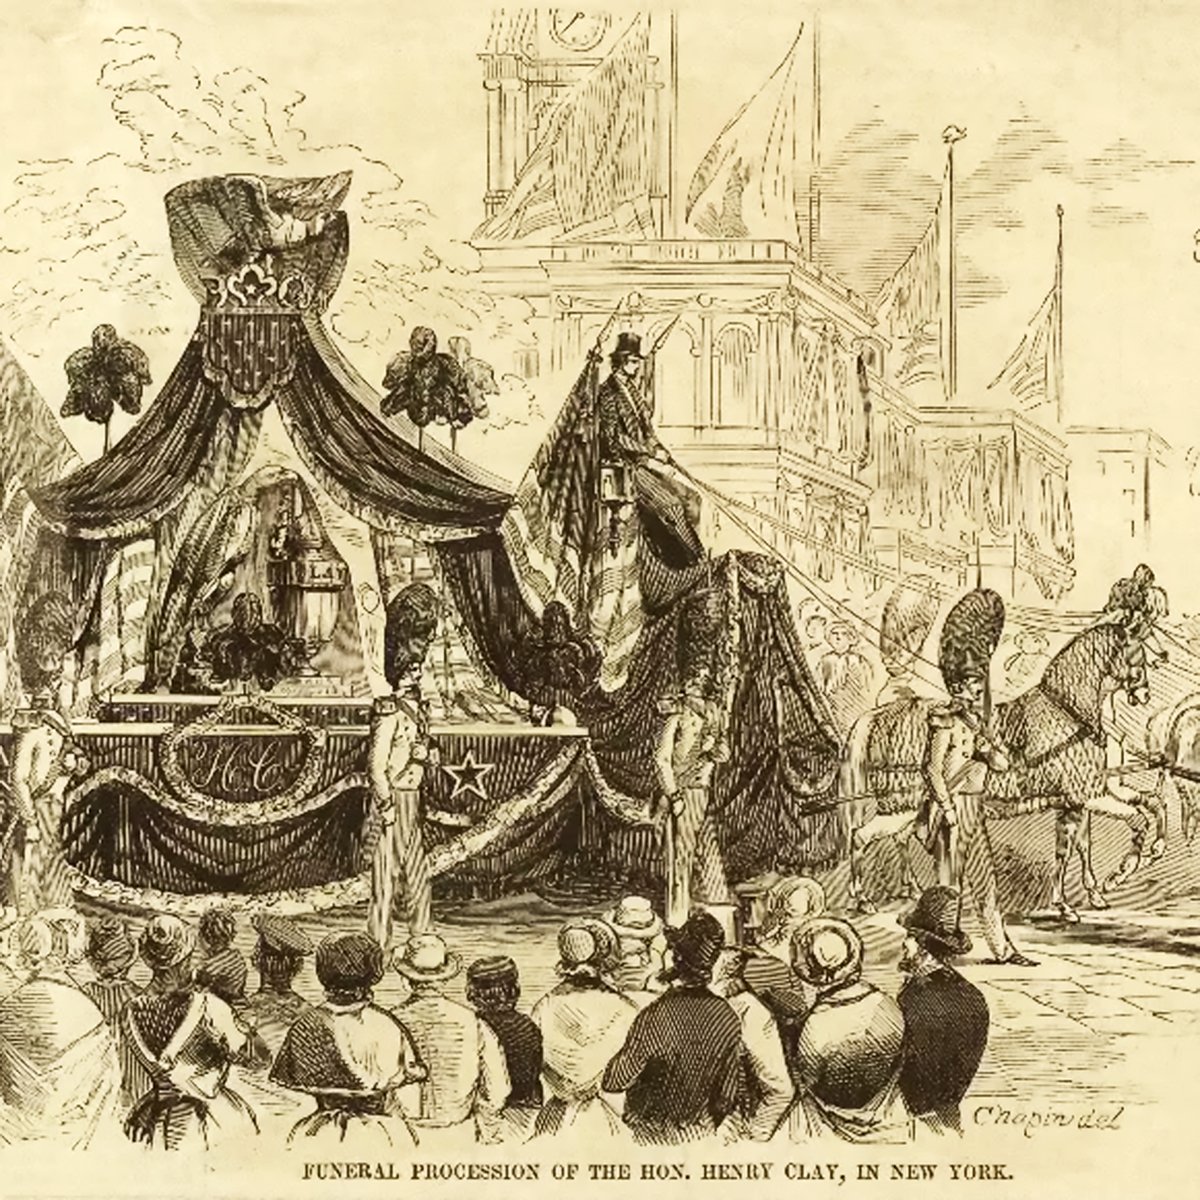 An illustration depicting the funeral procession of the Honorable Henry Clay in New York. The scene is filled with onlookers dressed in period attire, observing a horse-drawn hearse adorned with drapery and plumes. In the background, the architecture of the city, including several church steeples, is faintly visible, suggesting the event's urban setting. The solemnity of the occasion is conveyed through the detailed rendering of the draped fabrics and the quiet, attentive stance of the crowd.